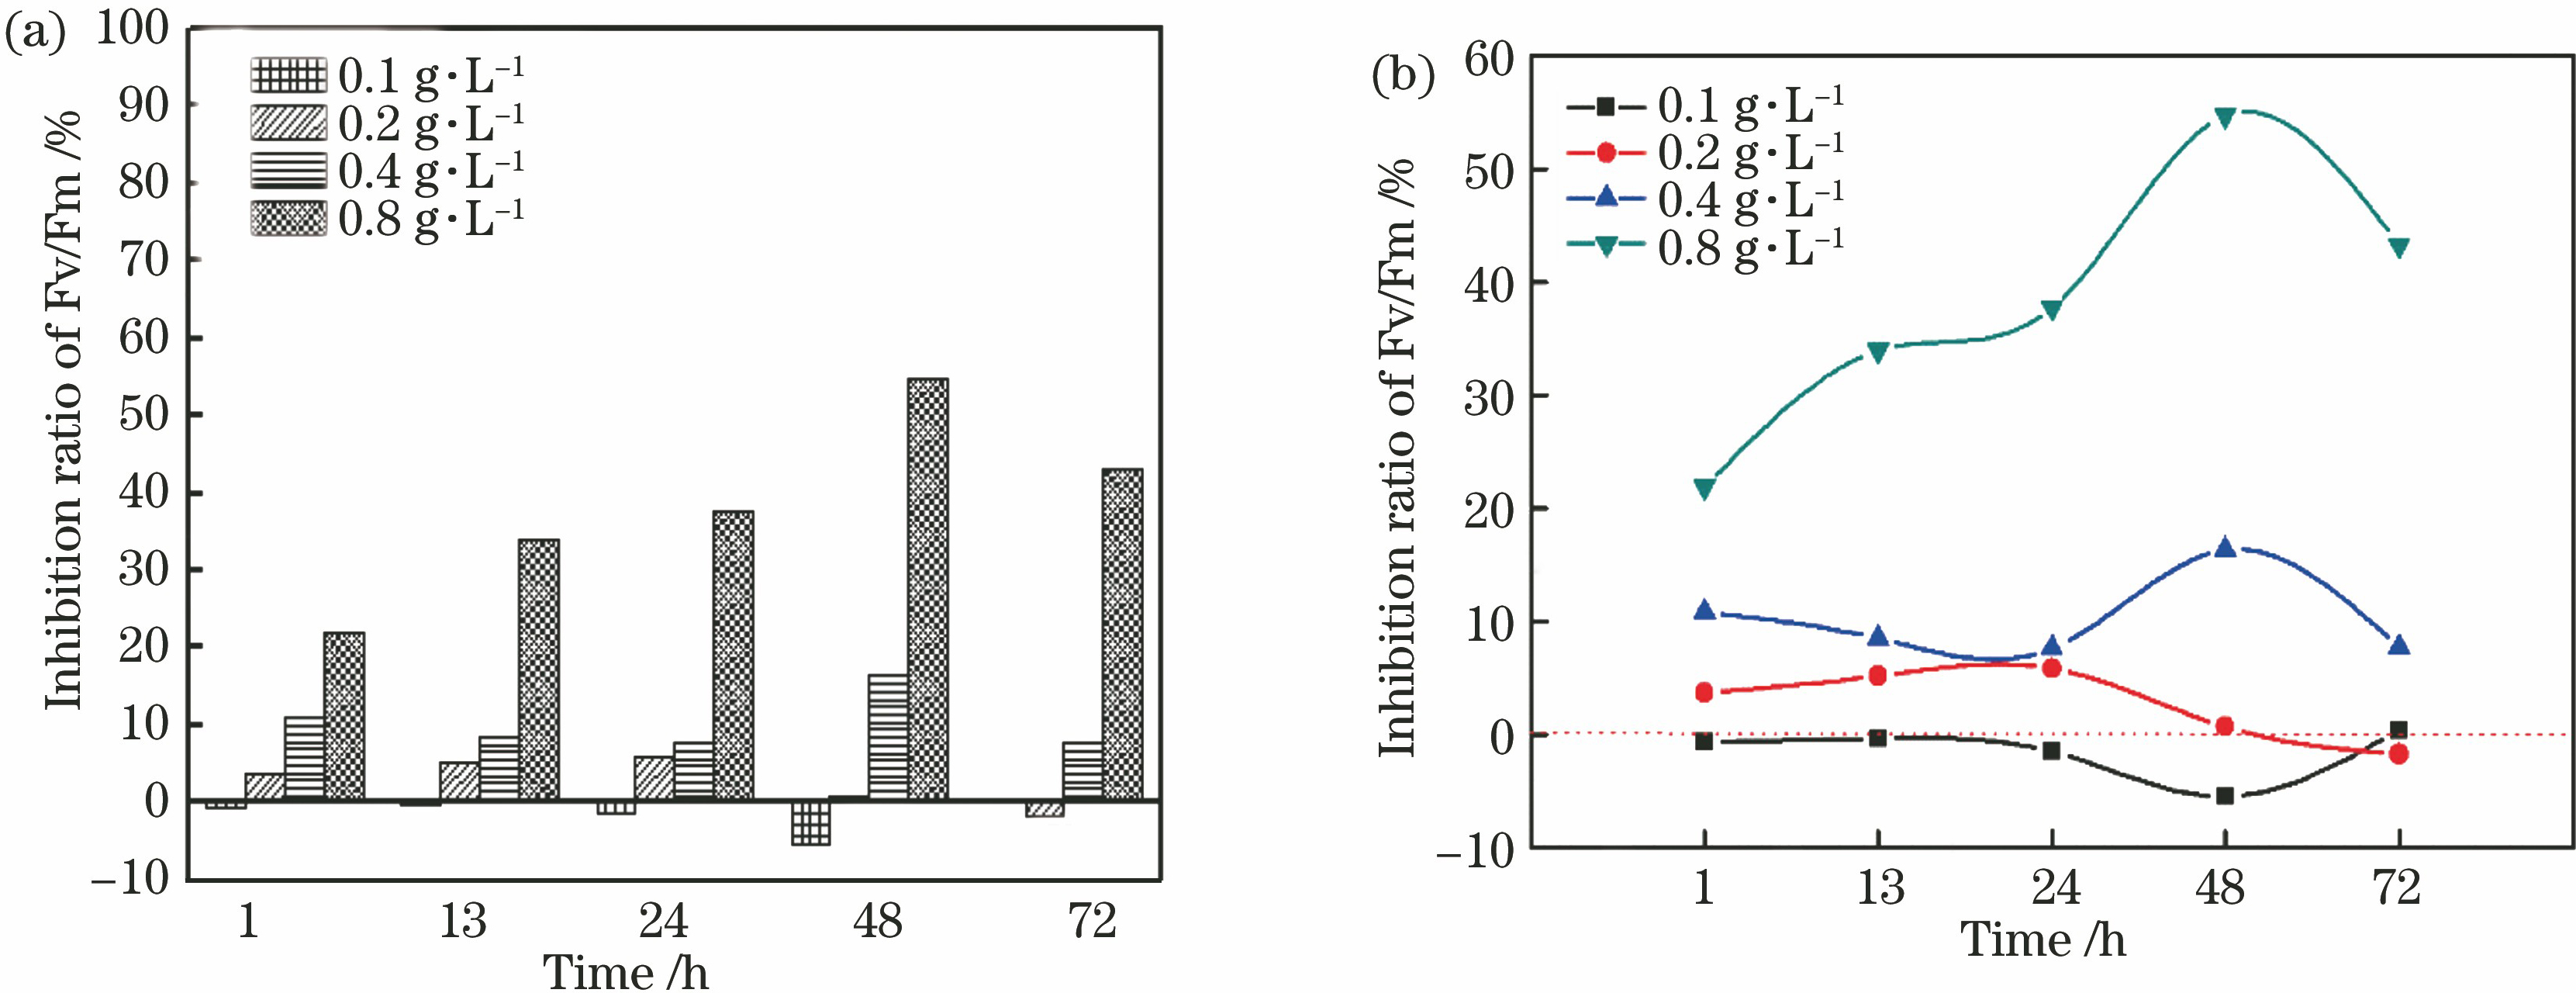 Response of photosynthetic activity parameters Fv/Fm to different phenol concentrations unde long-term stress. (a) Dose-effect of Fv/Fm on phenol at different time; (b) time-effect trend of Fv/Fm on phenol